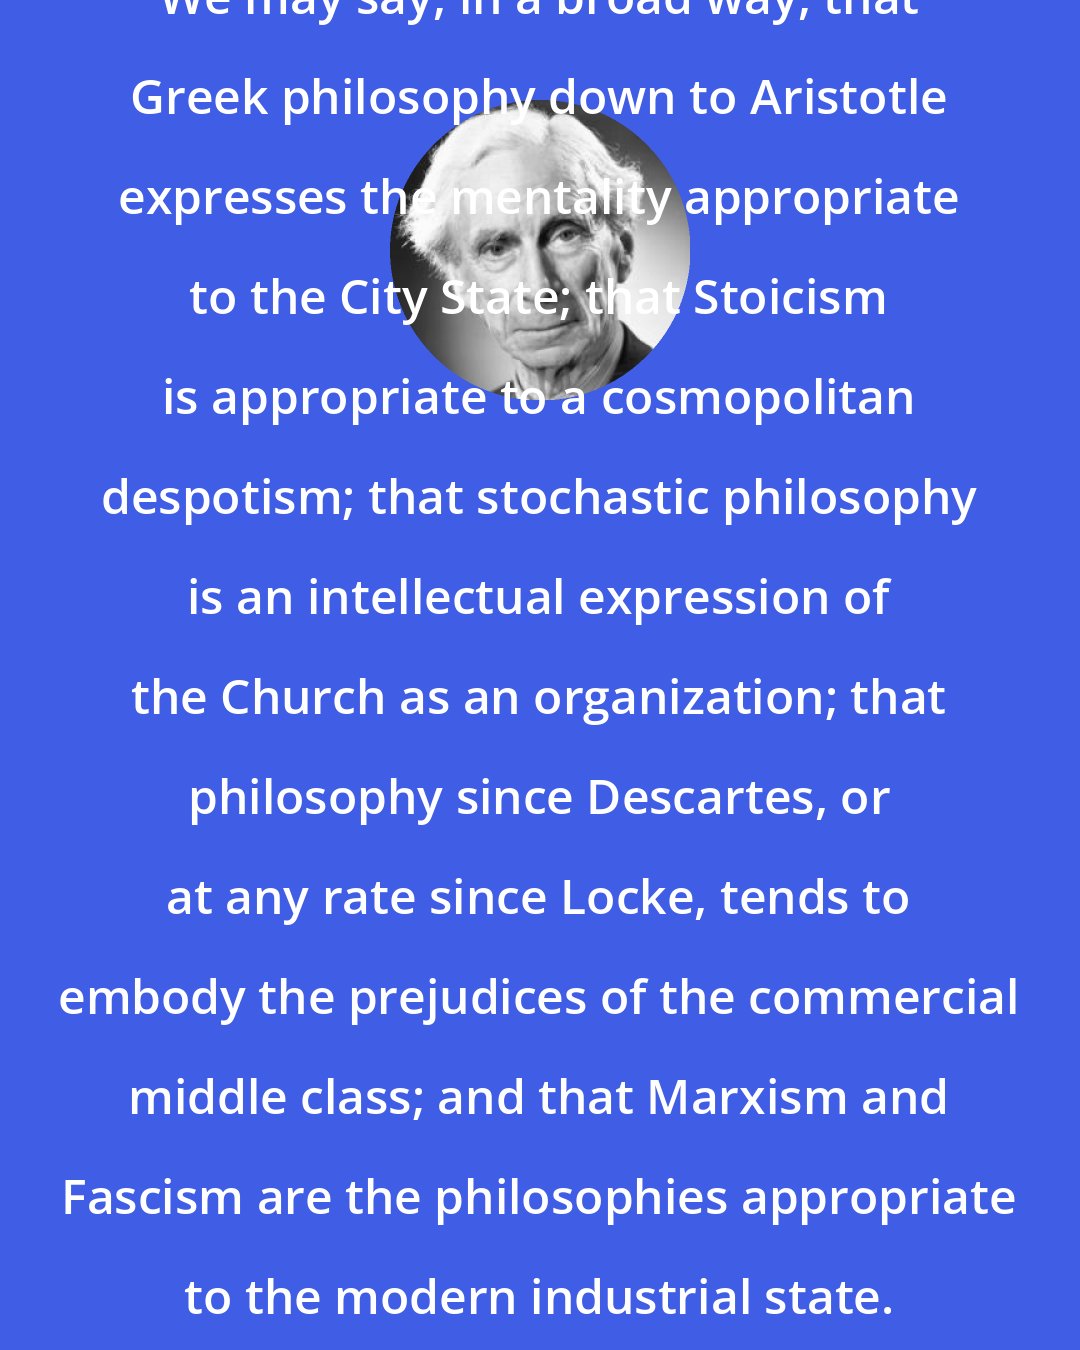 Bertrand Russell: We may say, in a broad way, that Greek philosophy down to Aristotle expresses the mentality appropriate to the City State; that Stoicism is appropriate to a cosmopolitan despotism; that stochastic philosophy is an intellectual expression of the Church as an organization; that philosophy since Descartes, or at any rate since Locke, tends to embody the prejudices of the commercial middle class; and that Marxism and Fascism are the philosophies appropriate to the modern industrial state.